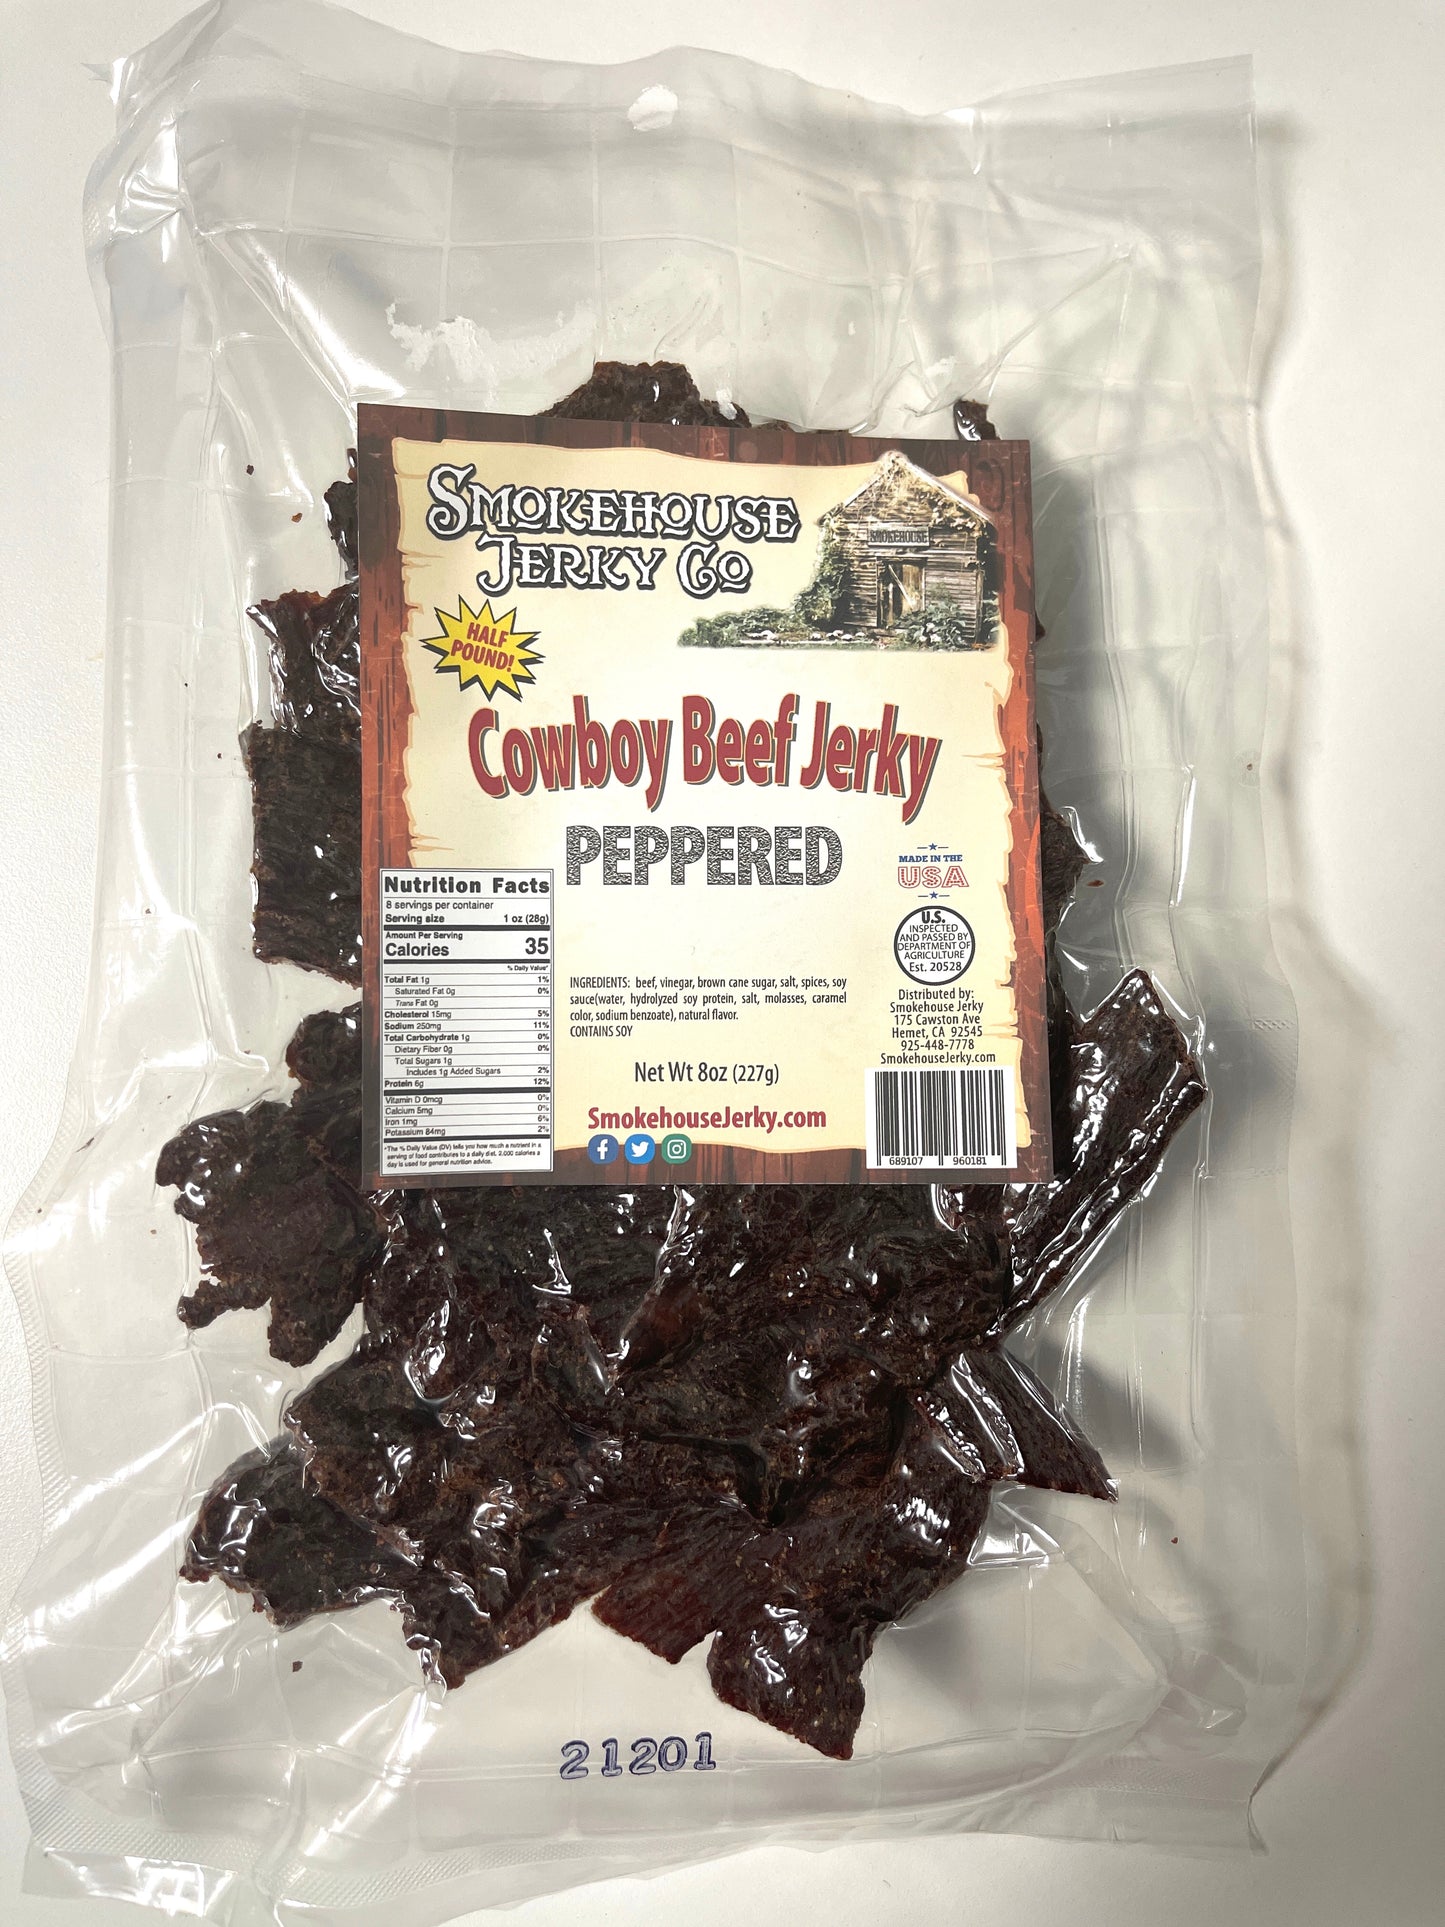 4oz Peppered Cowboy Beef Jerky